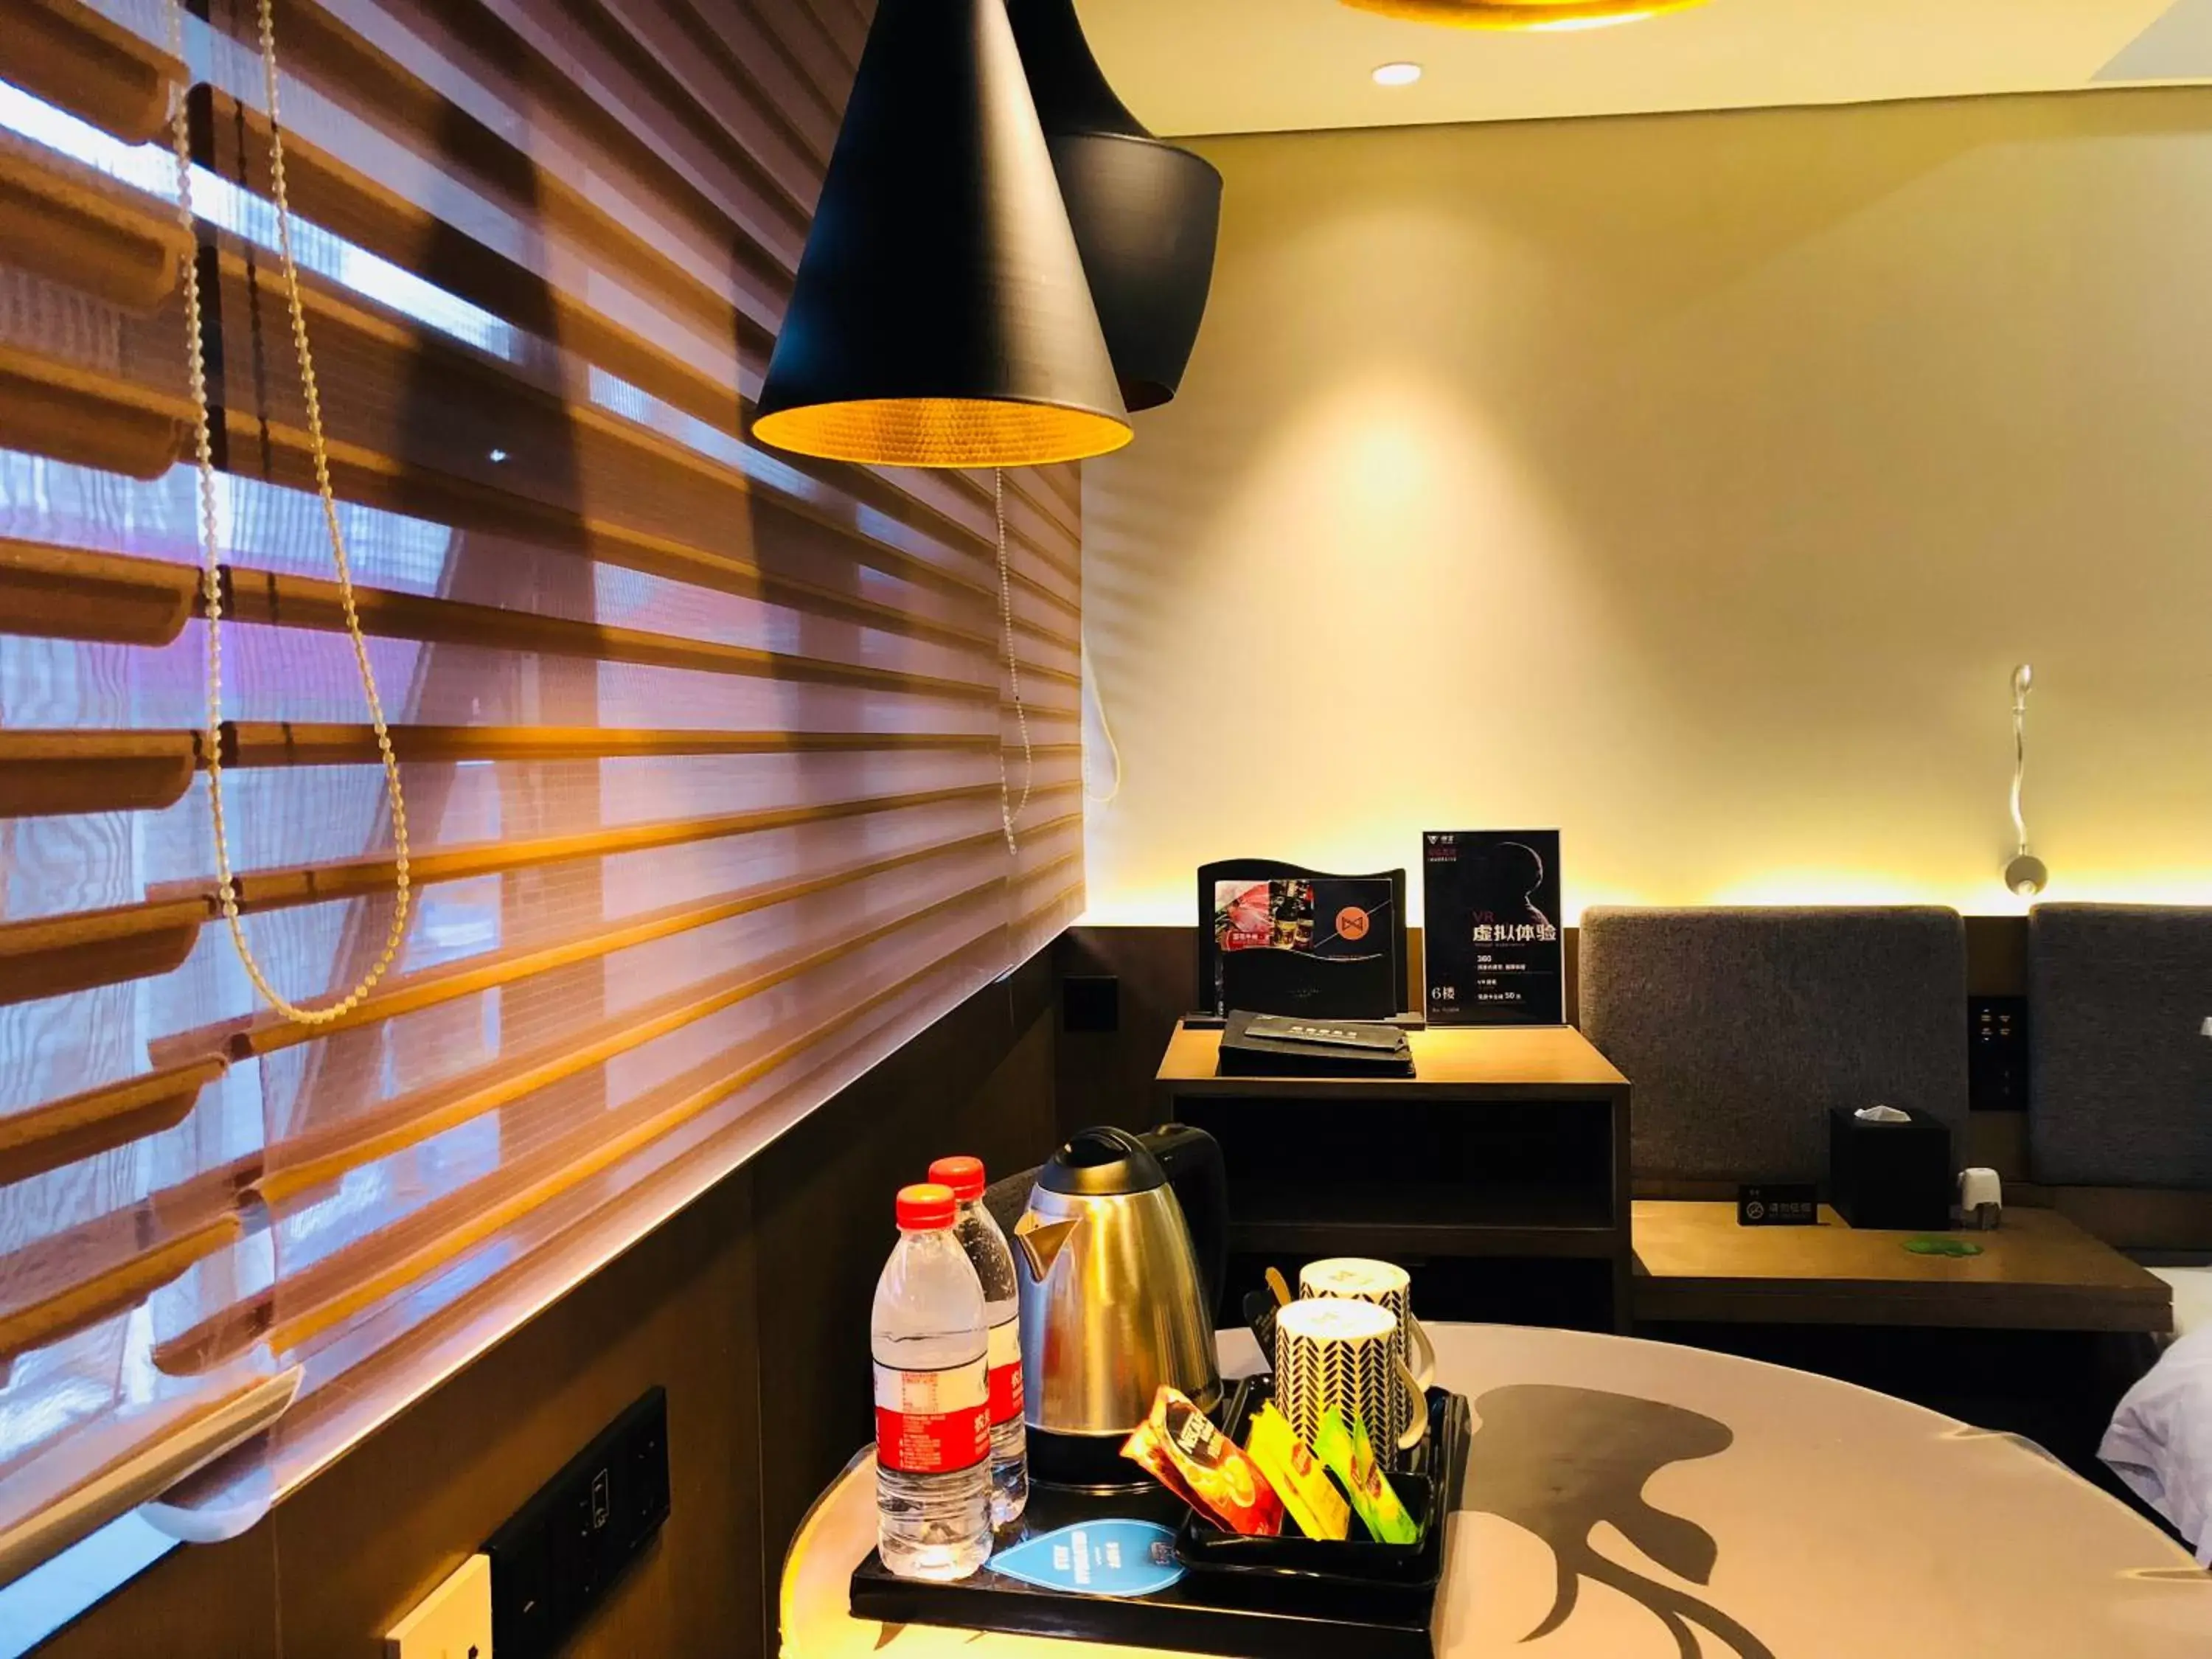 Food and drinks in Likto Hotel-Free Shuttle Bus to Canton Fair